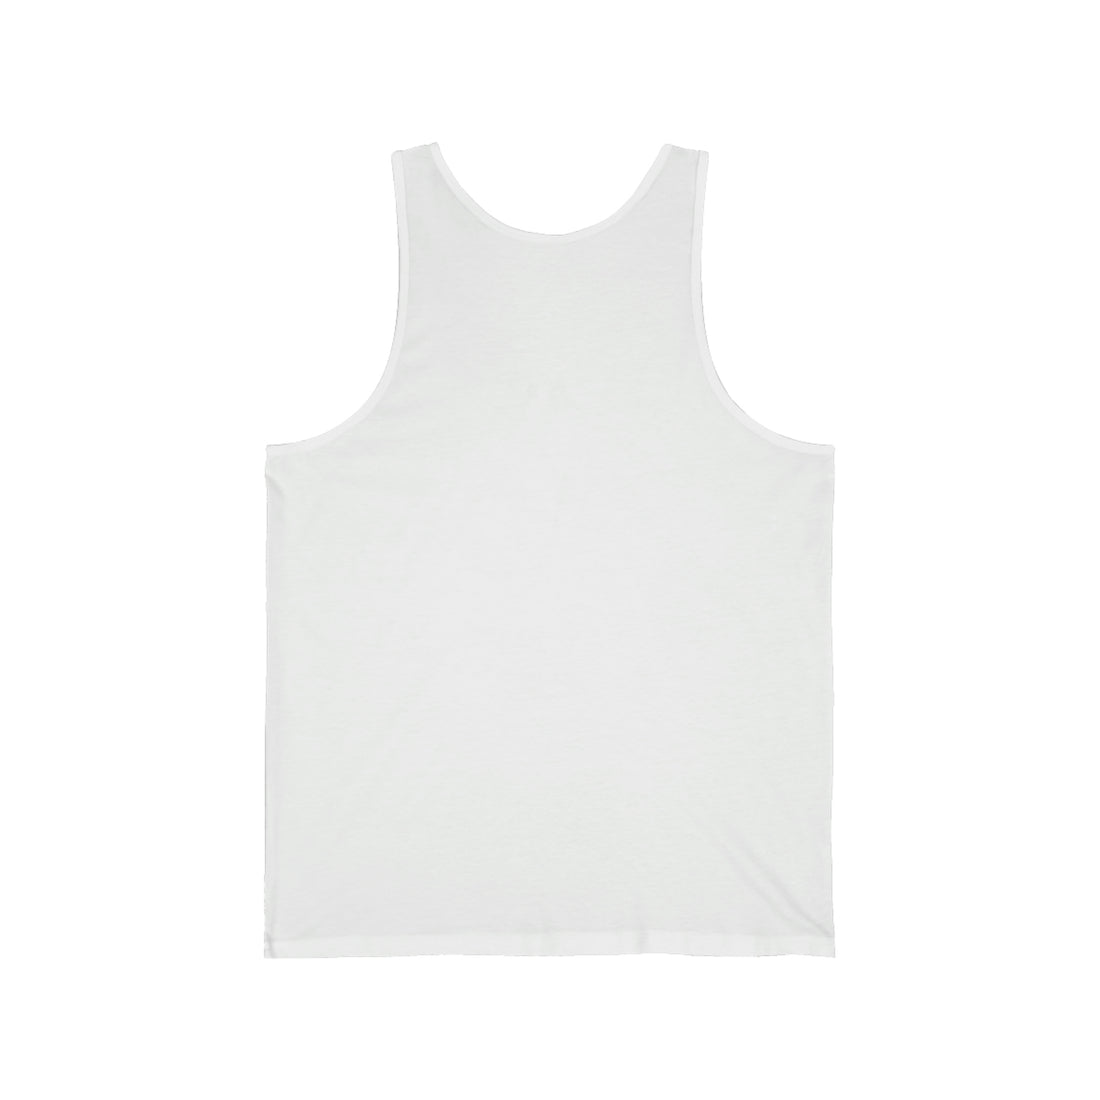 Stronger Together - Unisex Jersey Tank Top